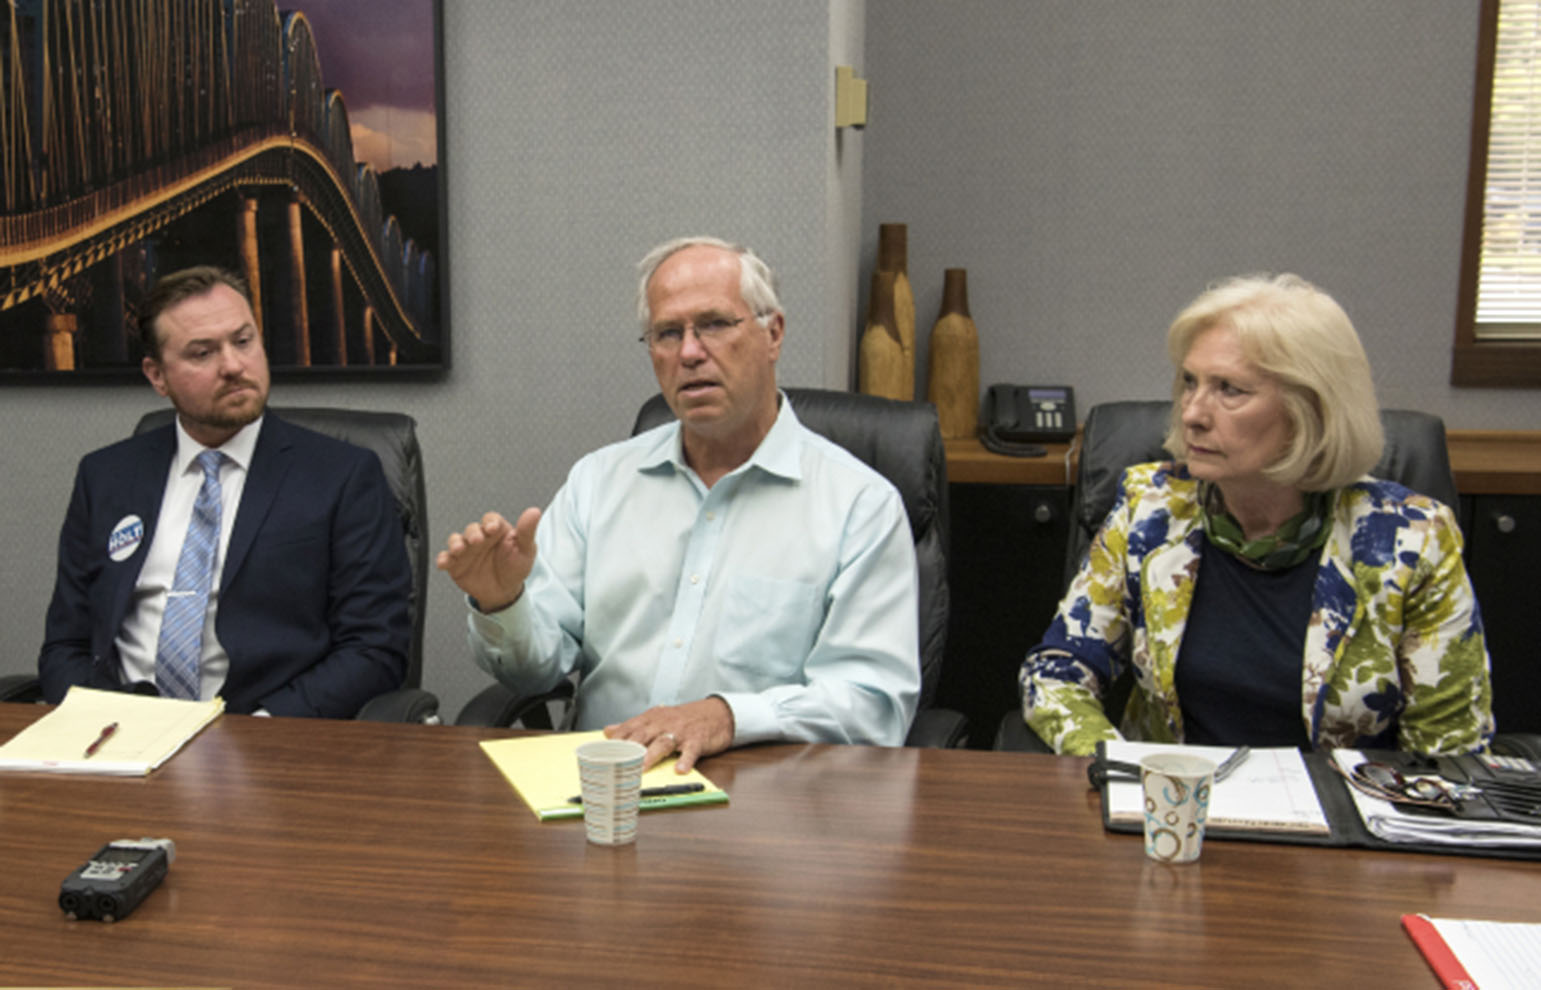 Candidates for Clark County Council chair Eric Holt, from left, Marc Boldt and Eileen Quiring meet with The Columbian’s Editorial Board in early July.